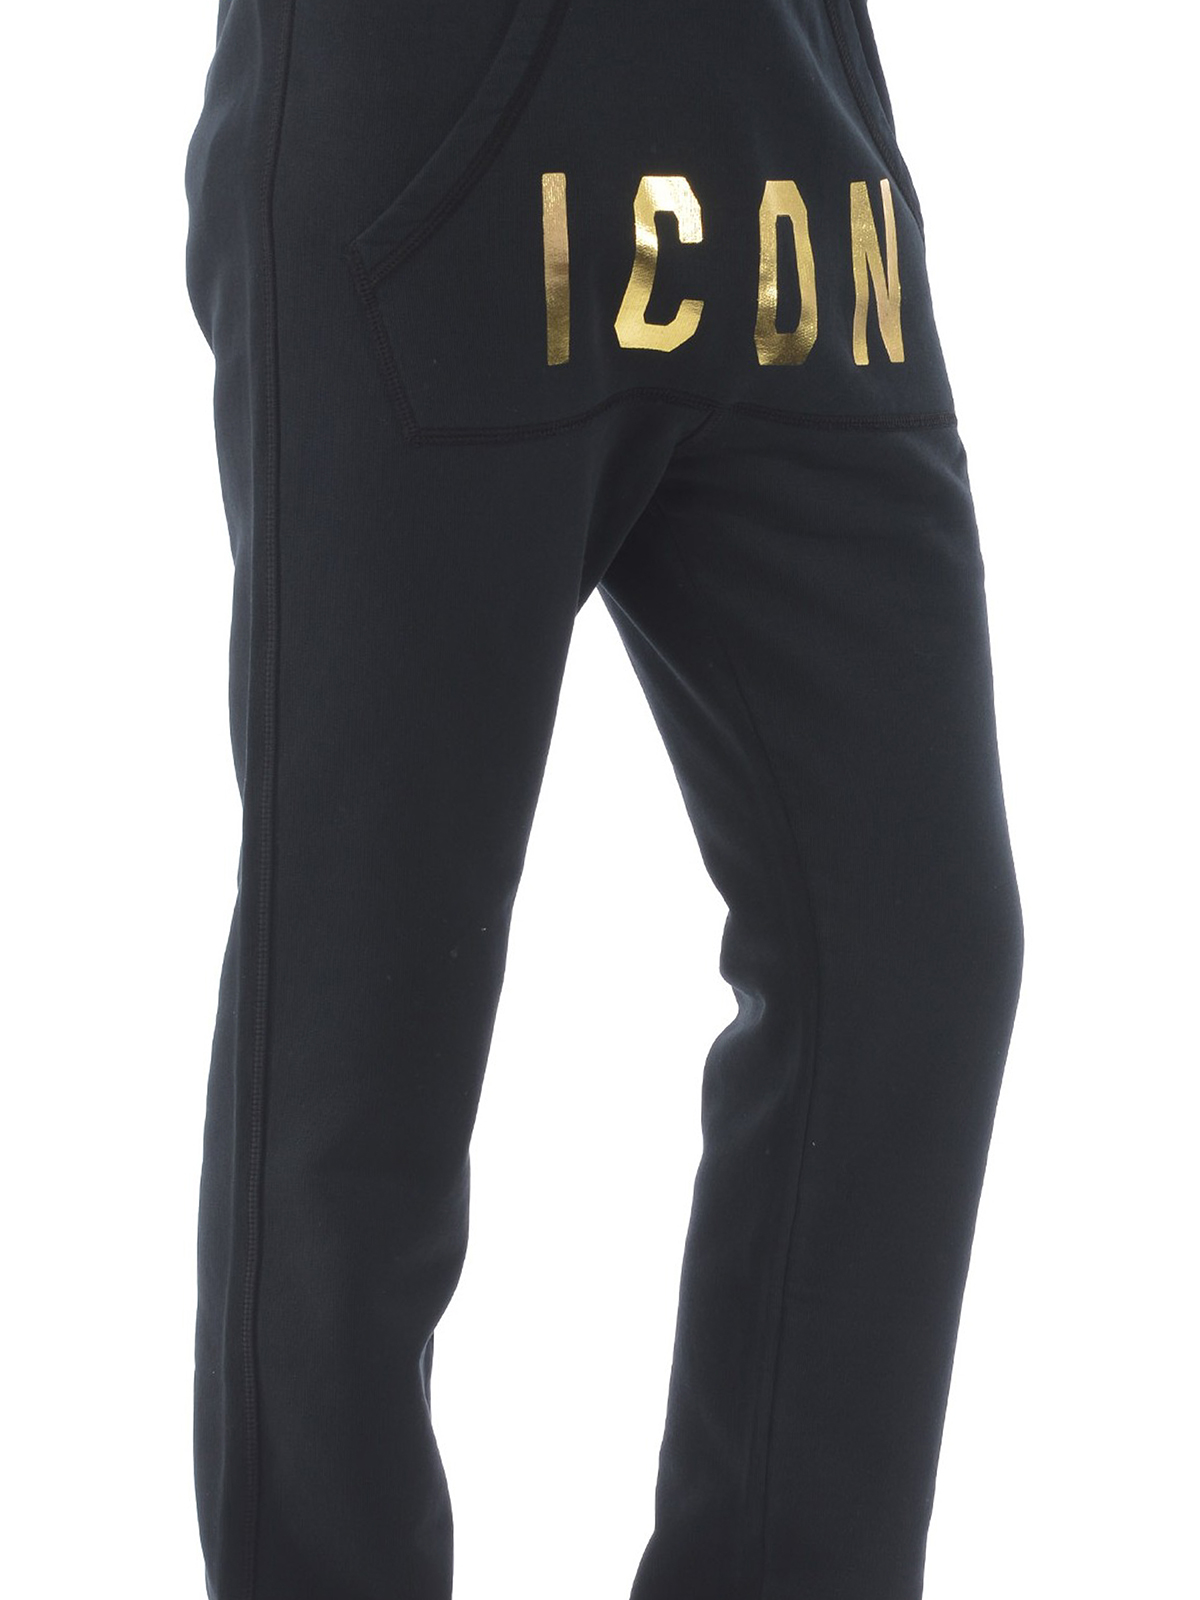 dsquared2 icon tracksuit